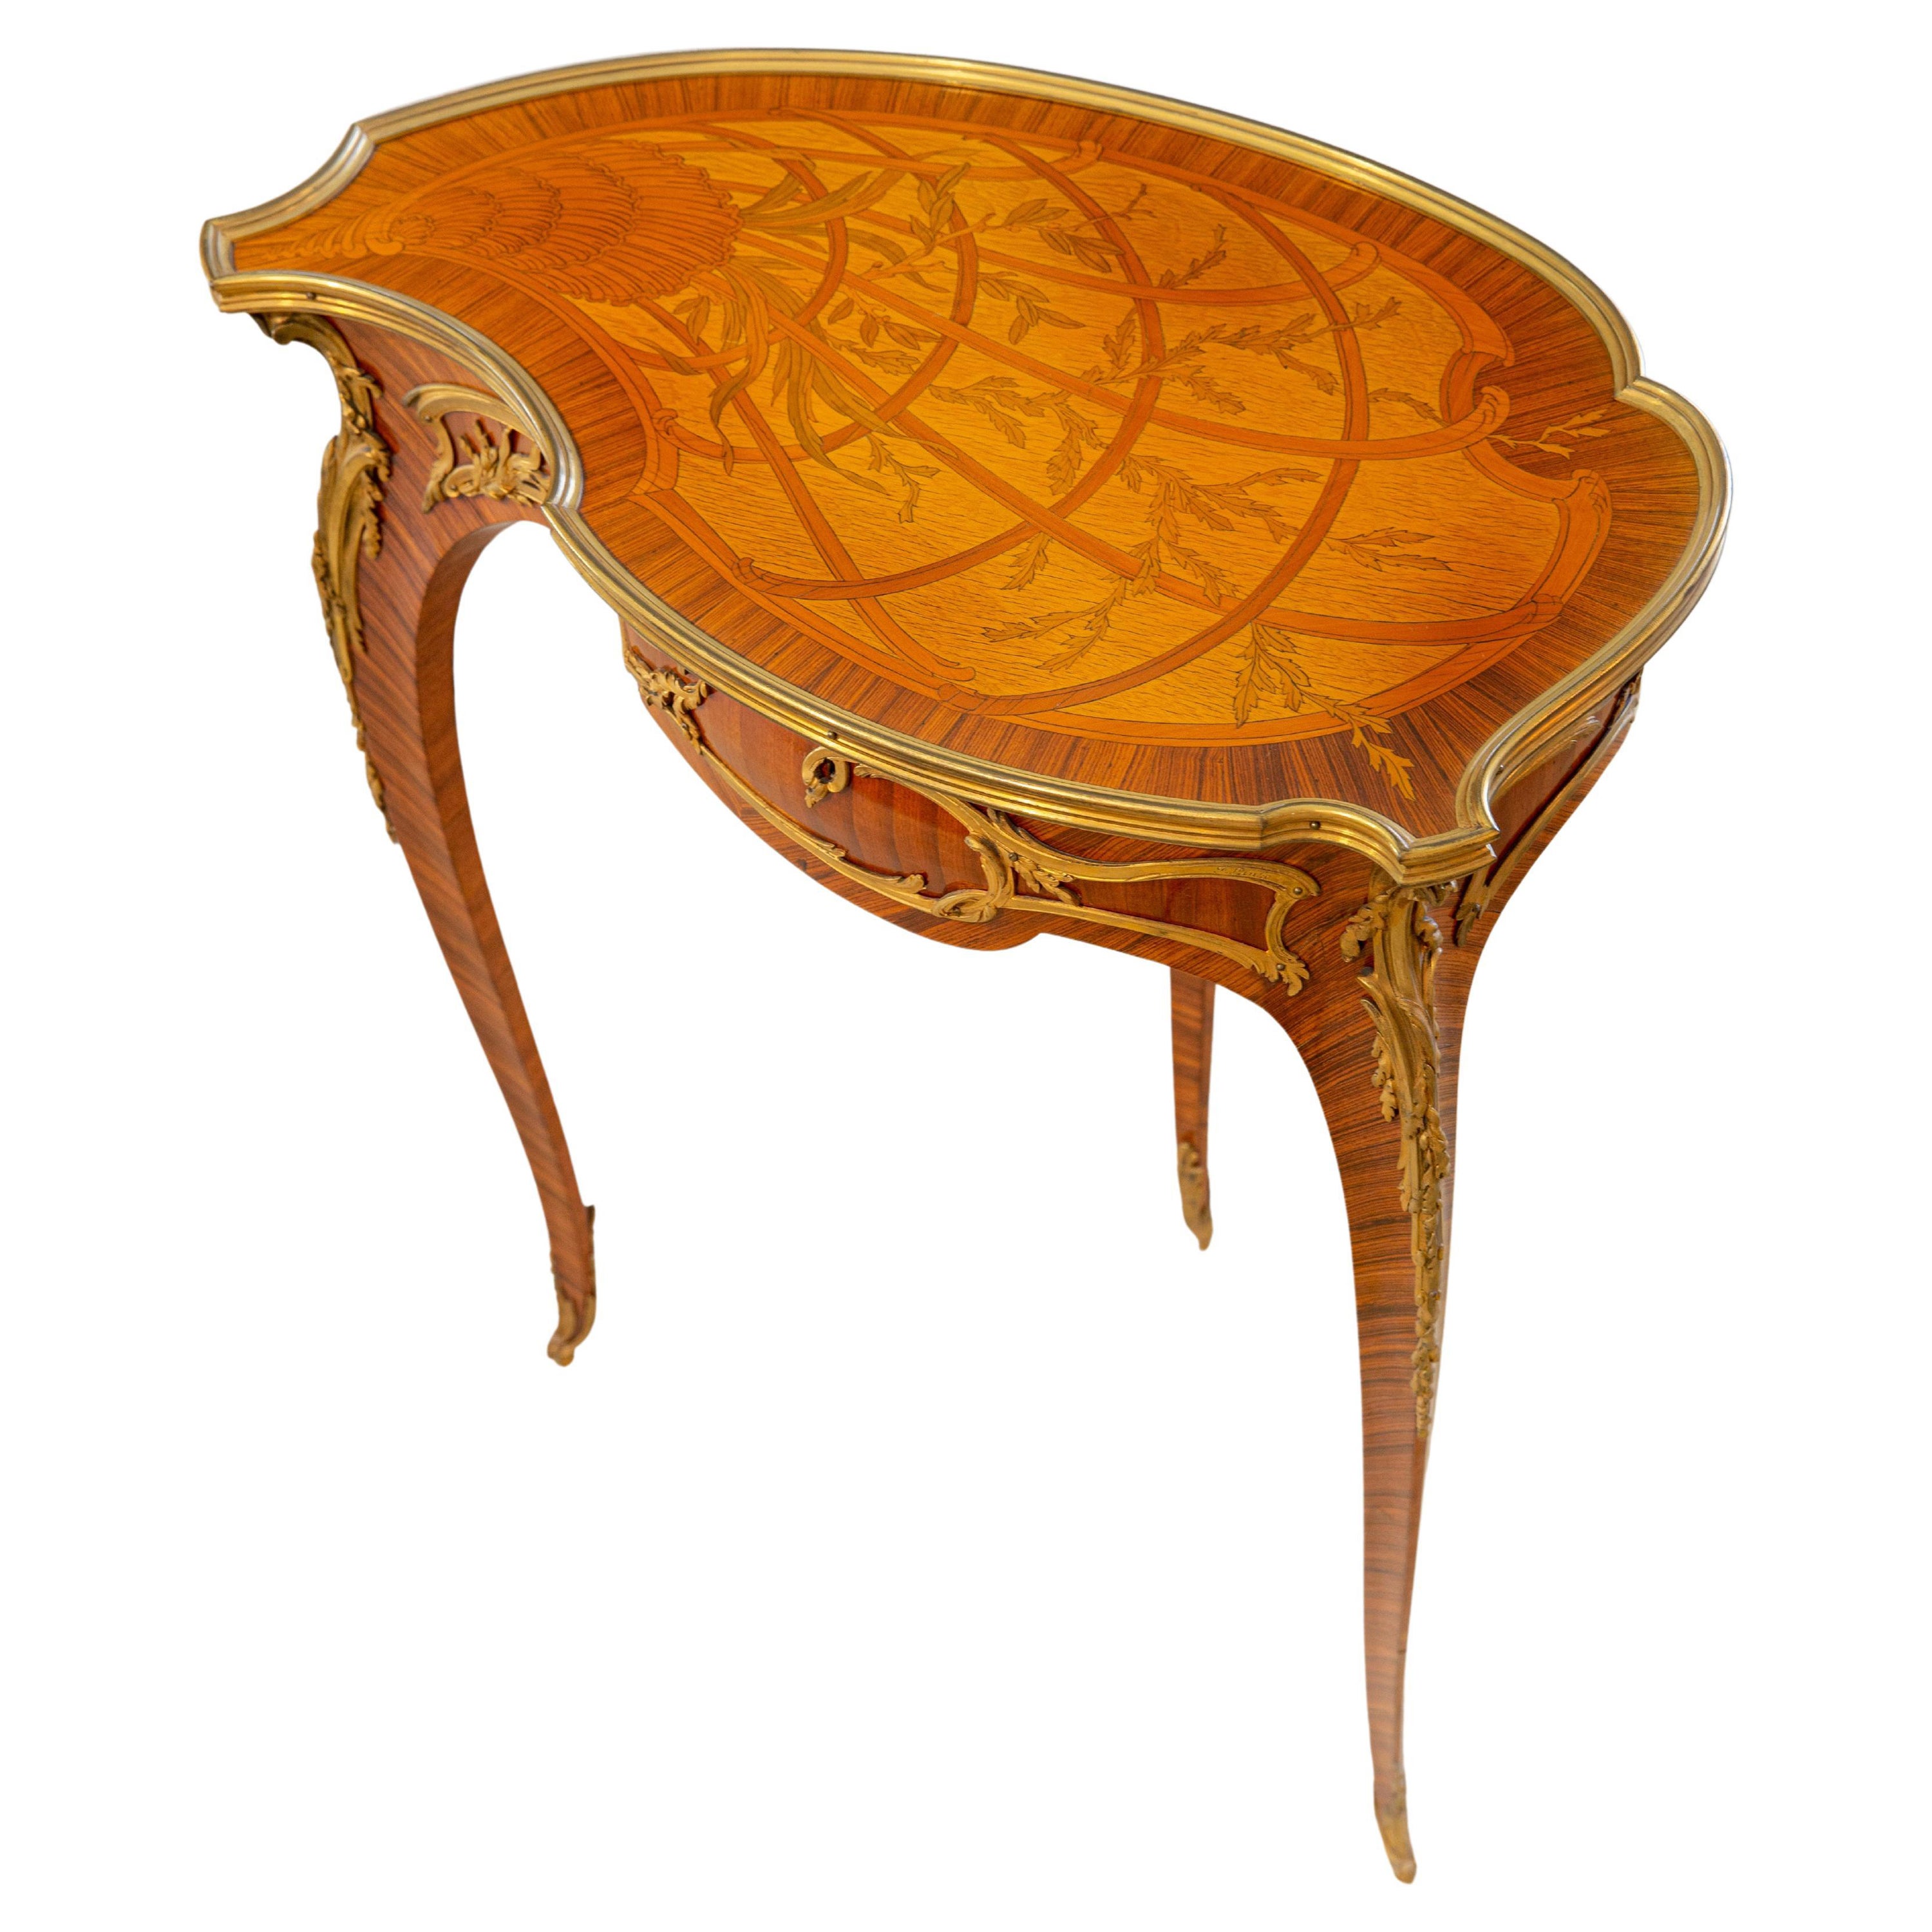 A Very Special Gilt Bronze Mounted Marquetry “Coquille” Table by François Linke